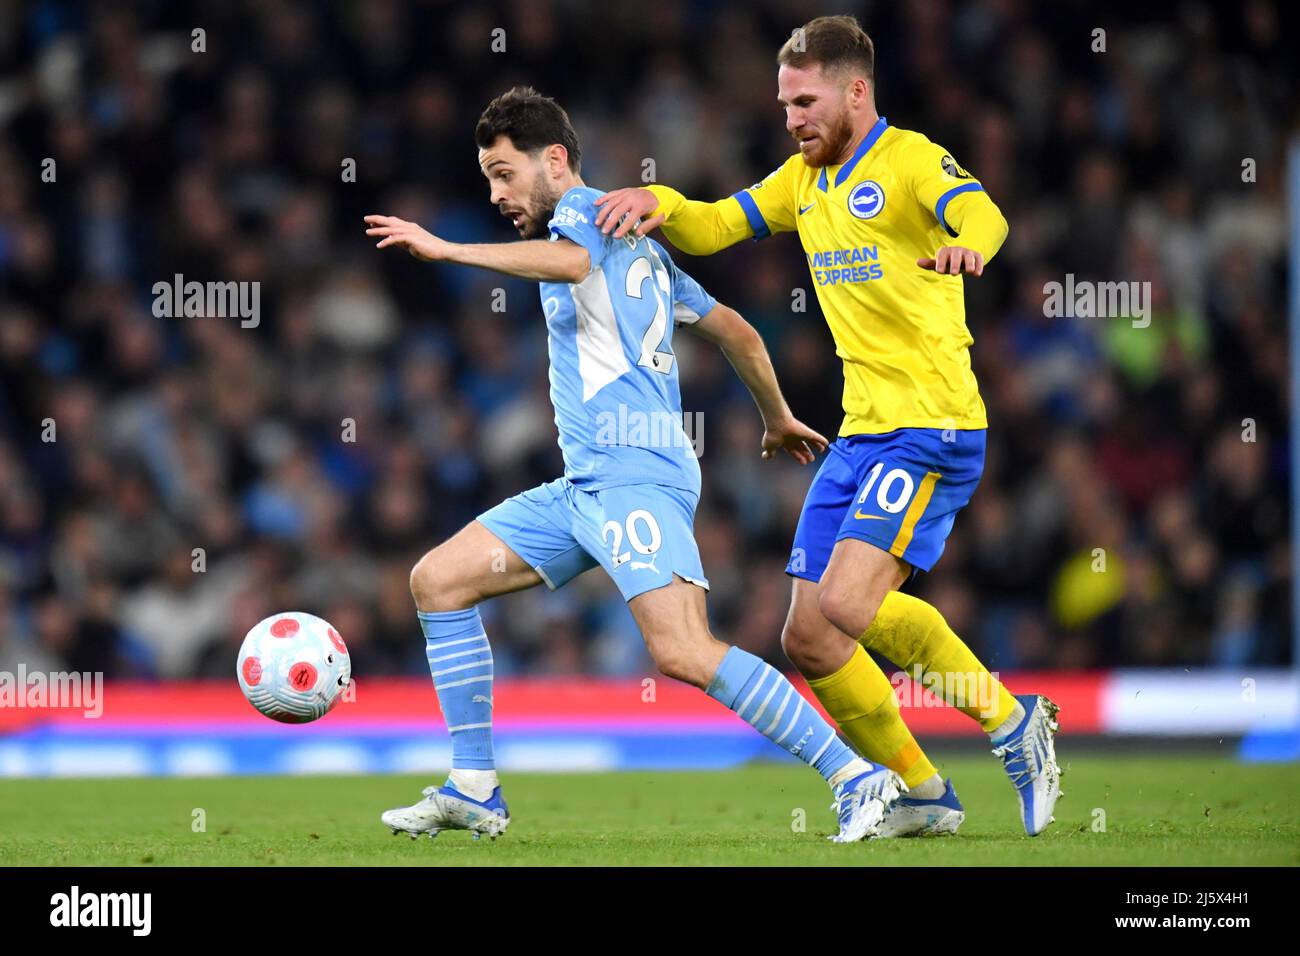 Manchester City's Bernardo Silva and Brighton and Hove Albion's Alex Mac Allister compete for possession. Picture date: Thursday April 21, 2022. Photo credit should read:   Anthony Devlin/Alamy Live News/Alamy Live News Stock Photo